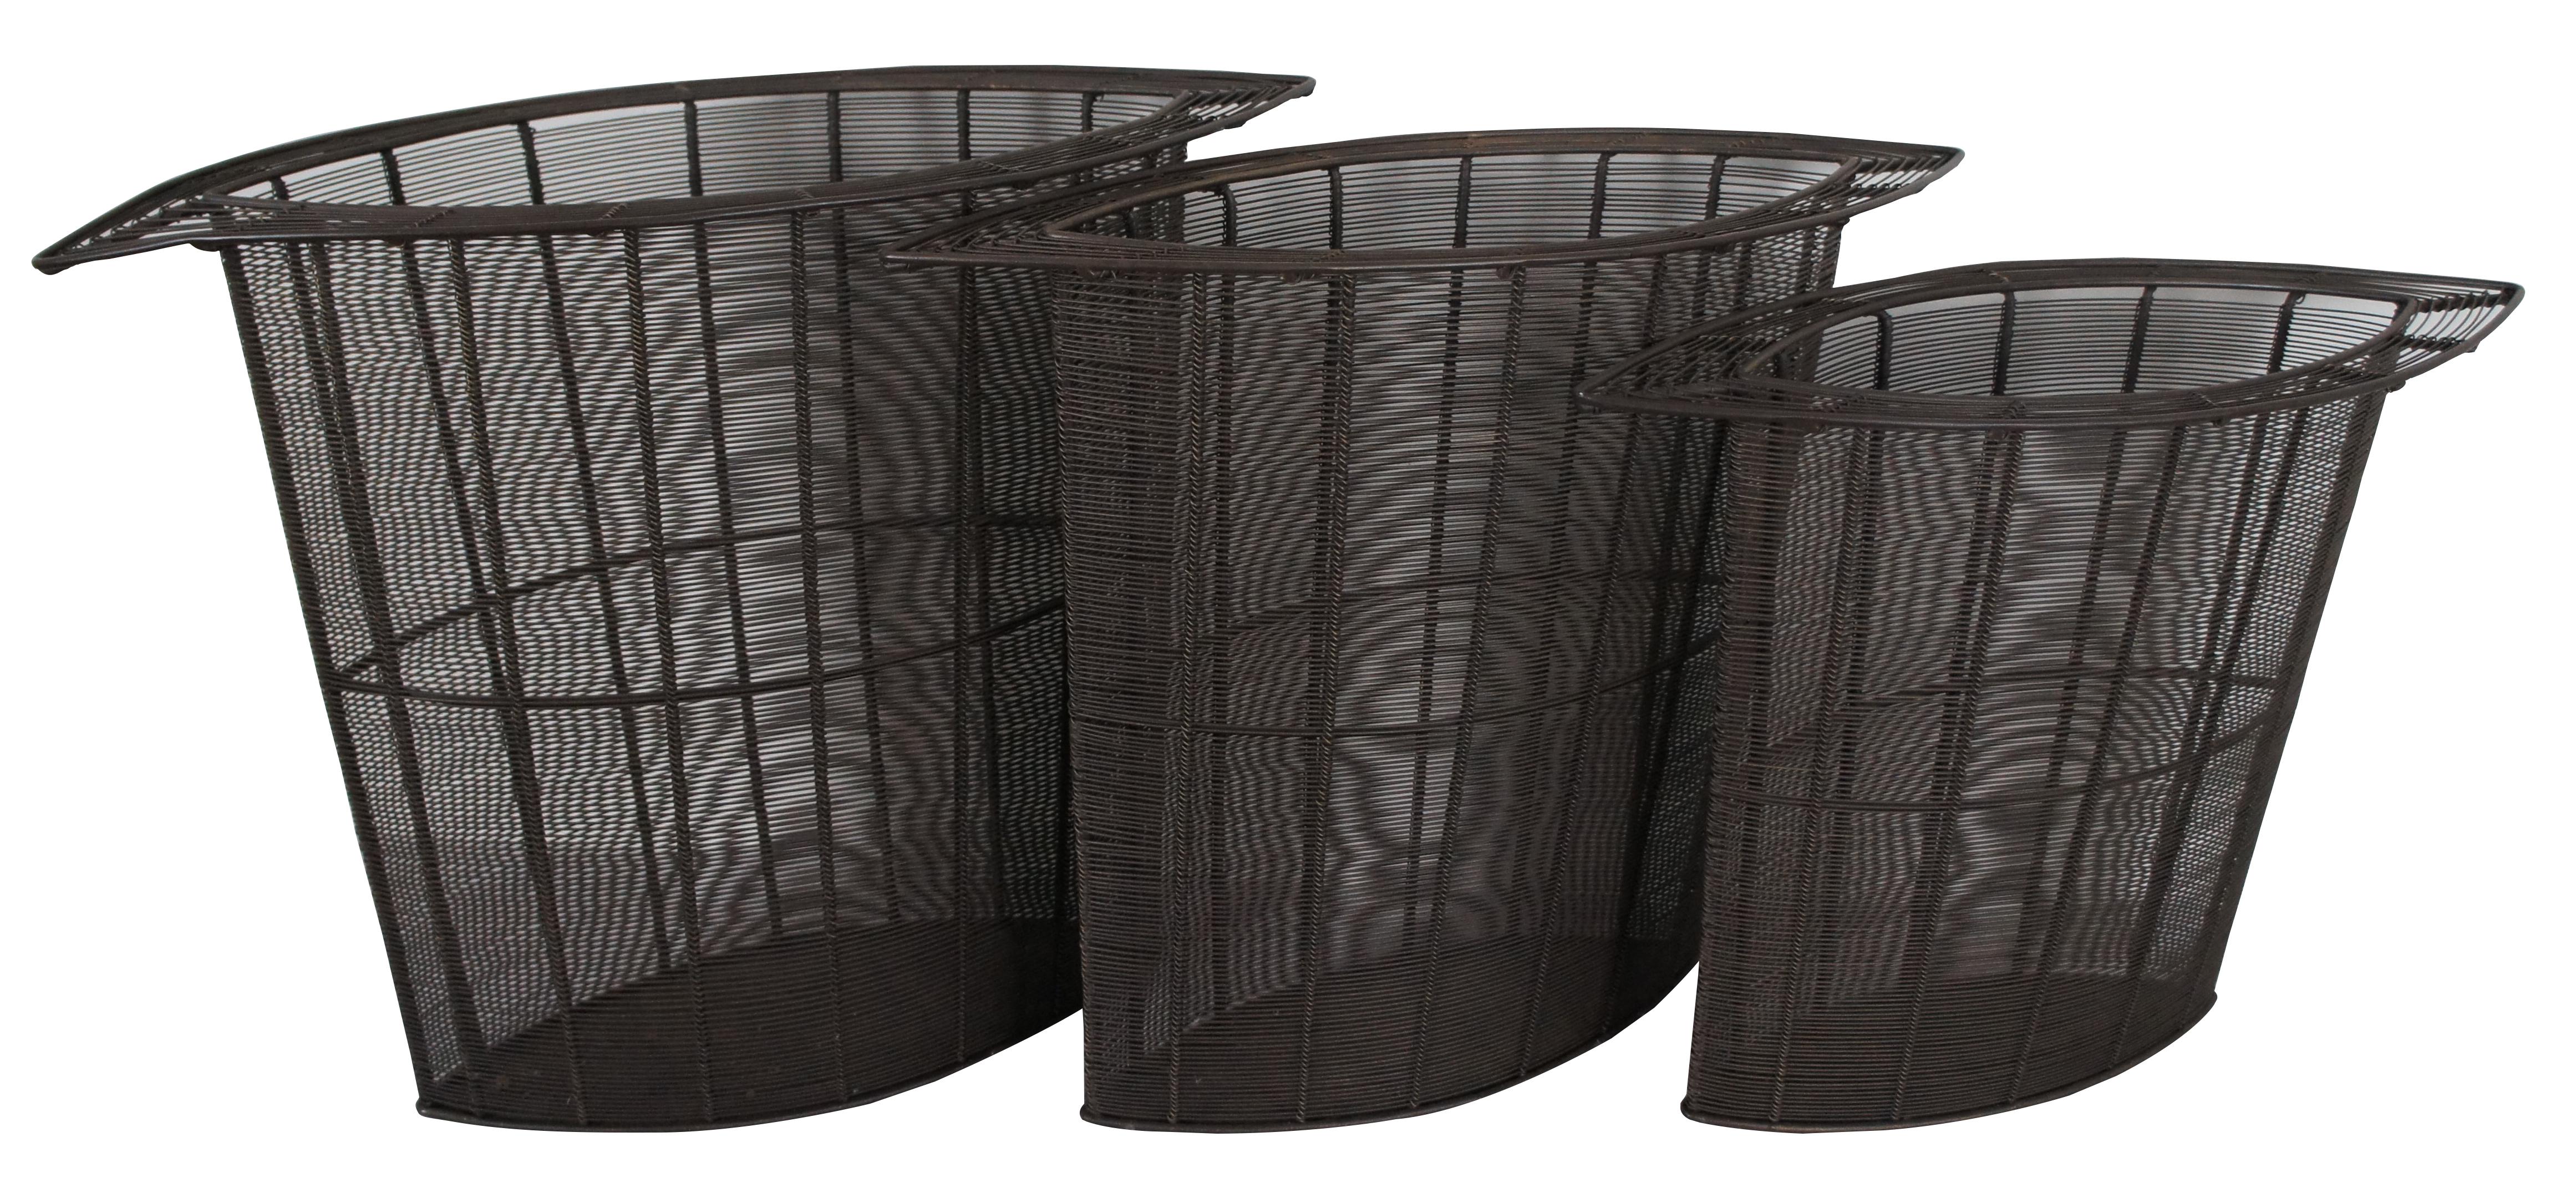 Set of three heavy oval shaped multi functional nesting baskets, displays or cane / umbrella stands, fashioned of gray-brown wire with wide rims, fashioned for Interlude Home Inc.

Small - 22” x 8” x 17” / Medium - 23.5” x 9.5” x 19” / Large - 25”